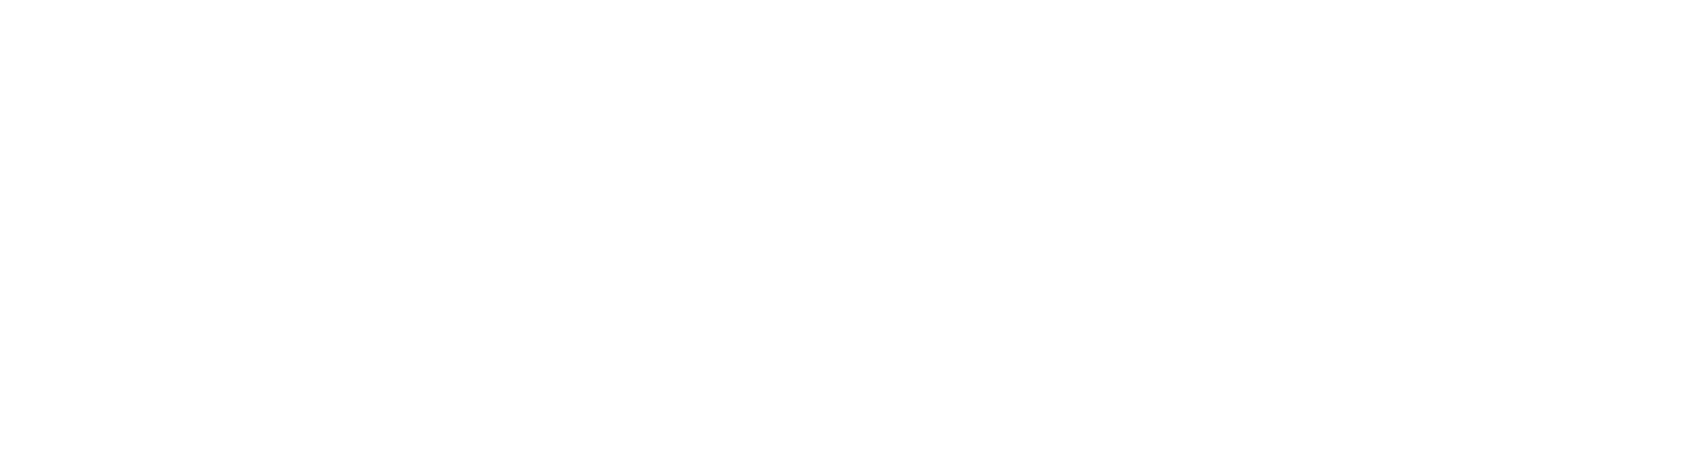 ABYSSN'T